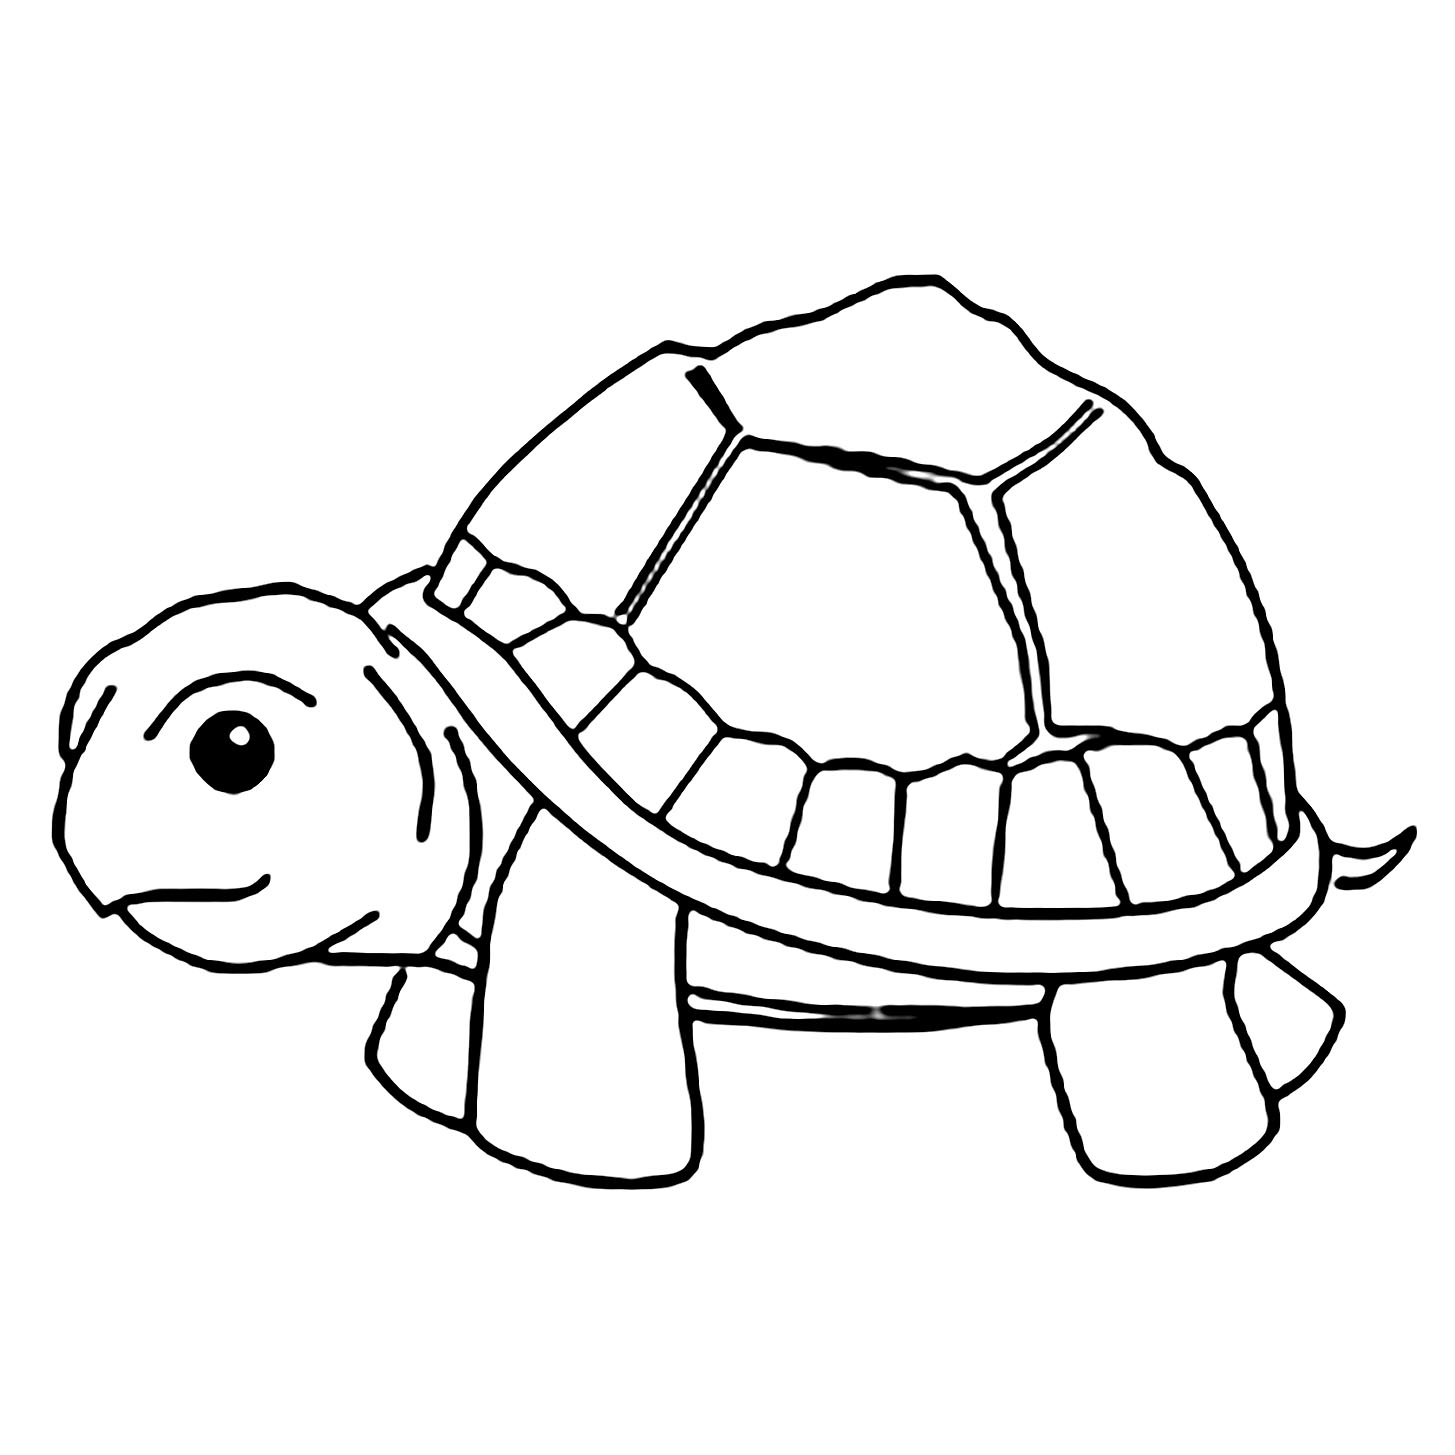 Download Turtles to download - Turtles Kids Coloring Pages